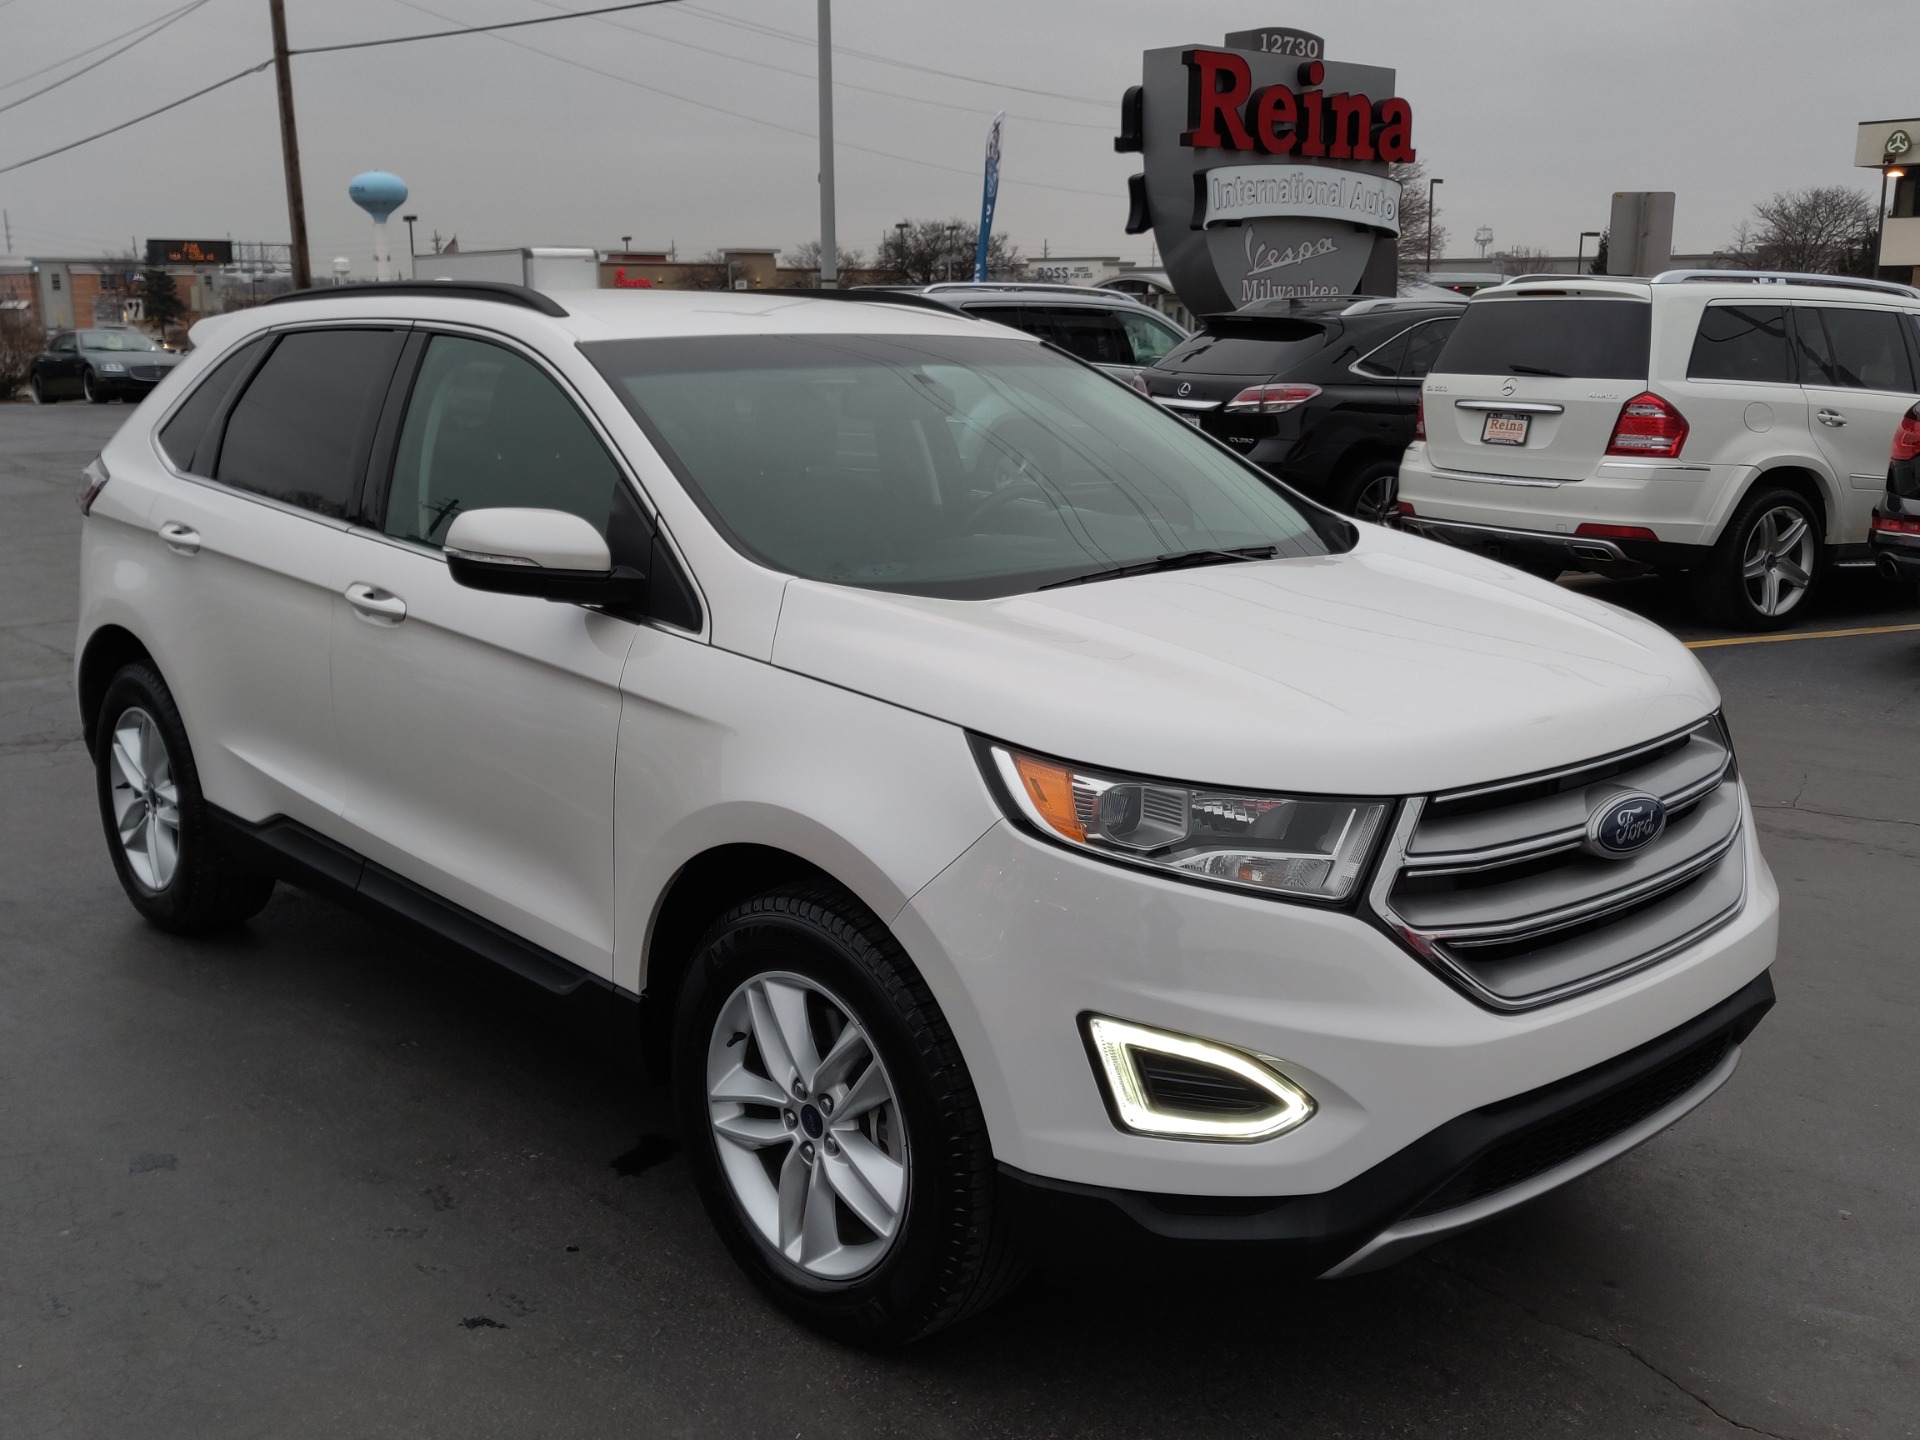 2015 Ford Edge SEL AWD Stock # 6724 for sale near Brookfield, WI | WI